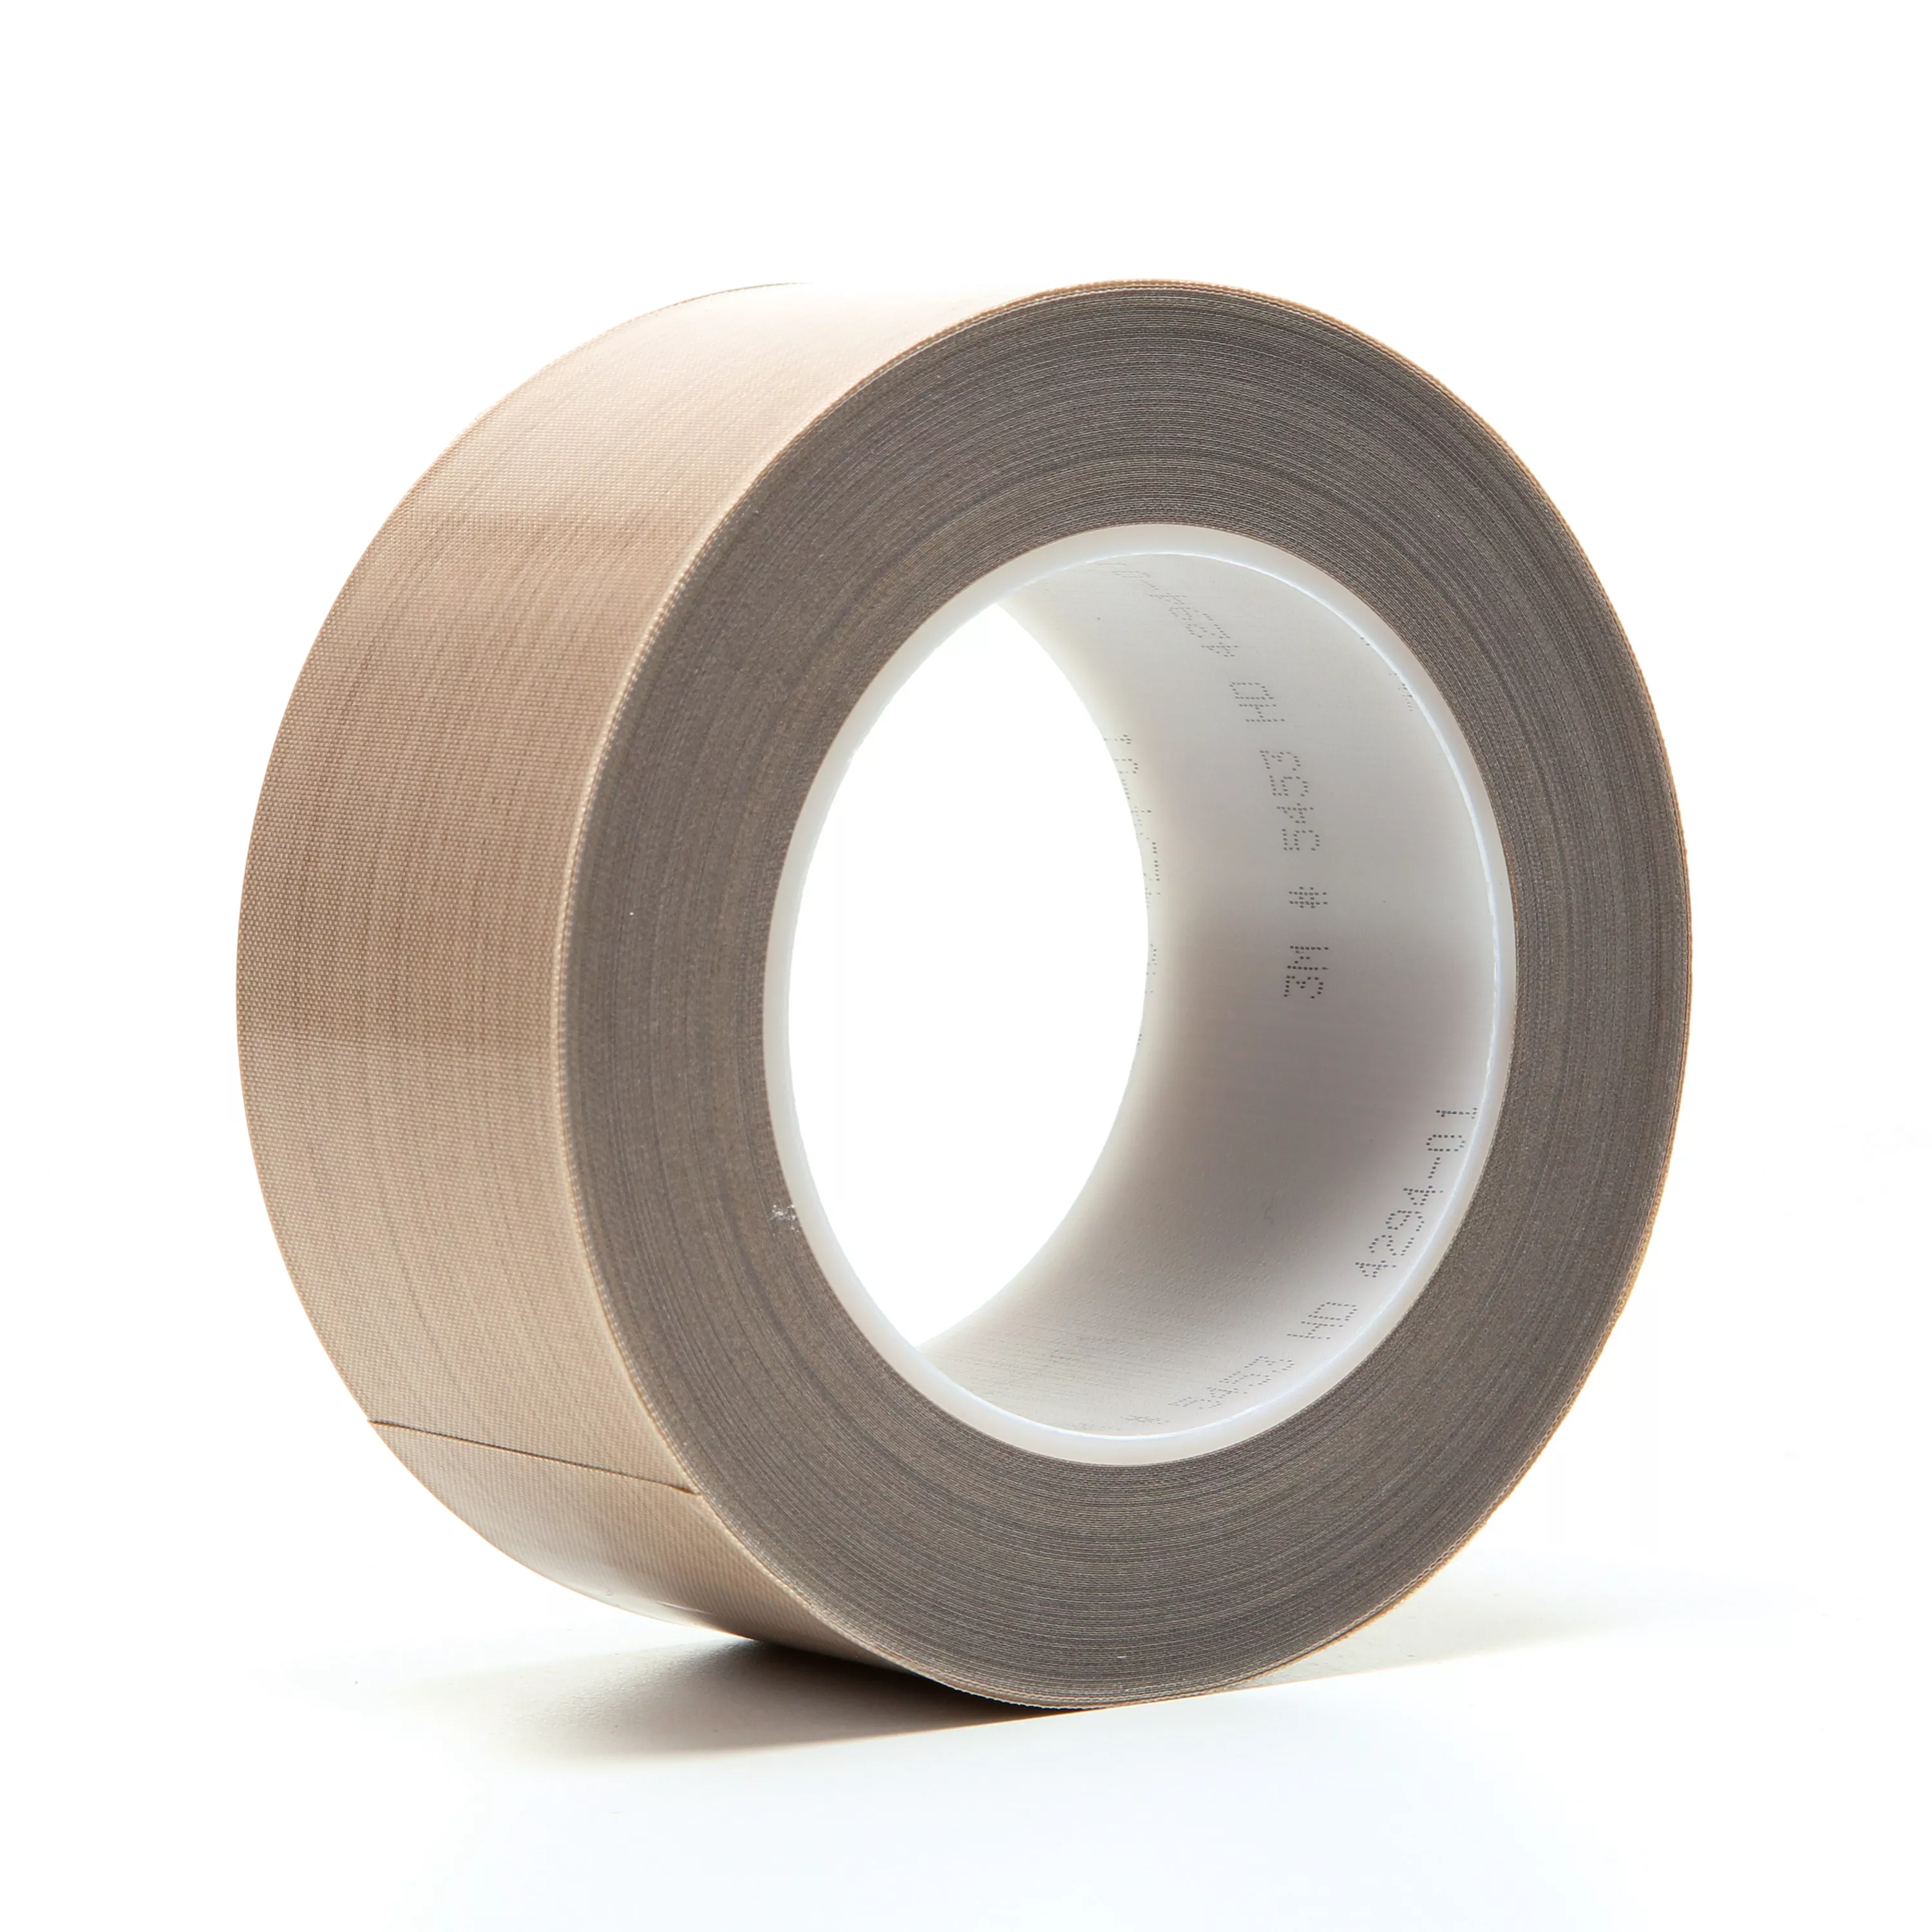 3M™ PTFE Glass Cloth Tape 5453, Brown, 2 in x 36 yd, 8.2 mil, 6
Roll/Case